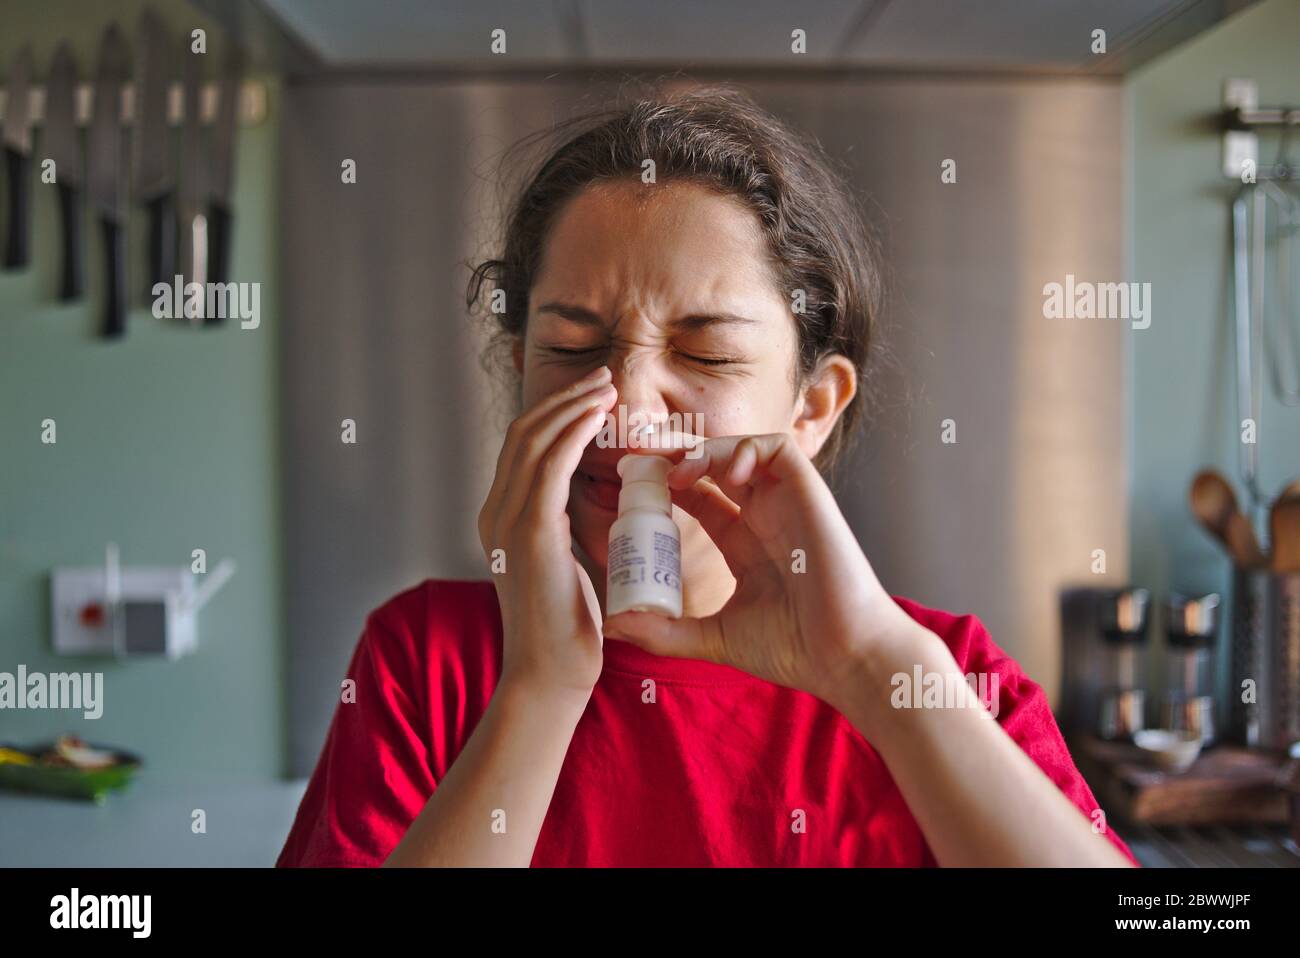 Child hay fever sufferer using nasal spray treatment for some relief from the symptoms of the allergy. Stock Photo